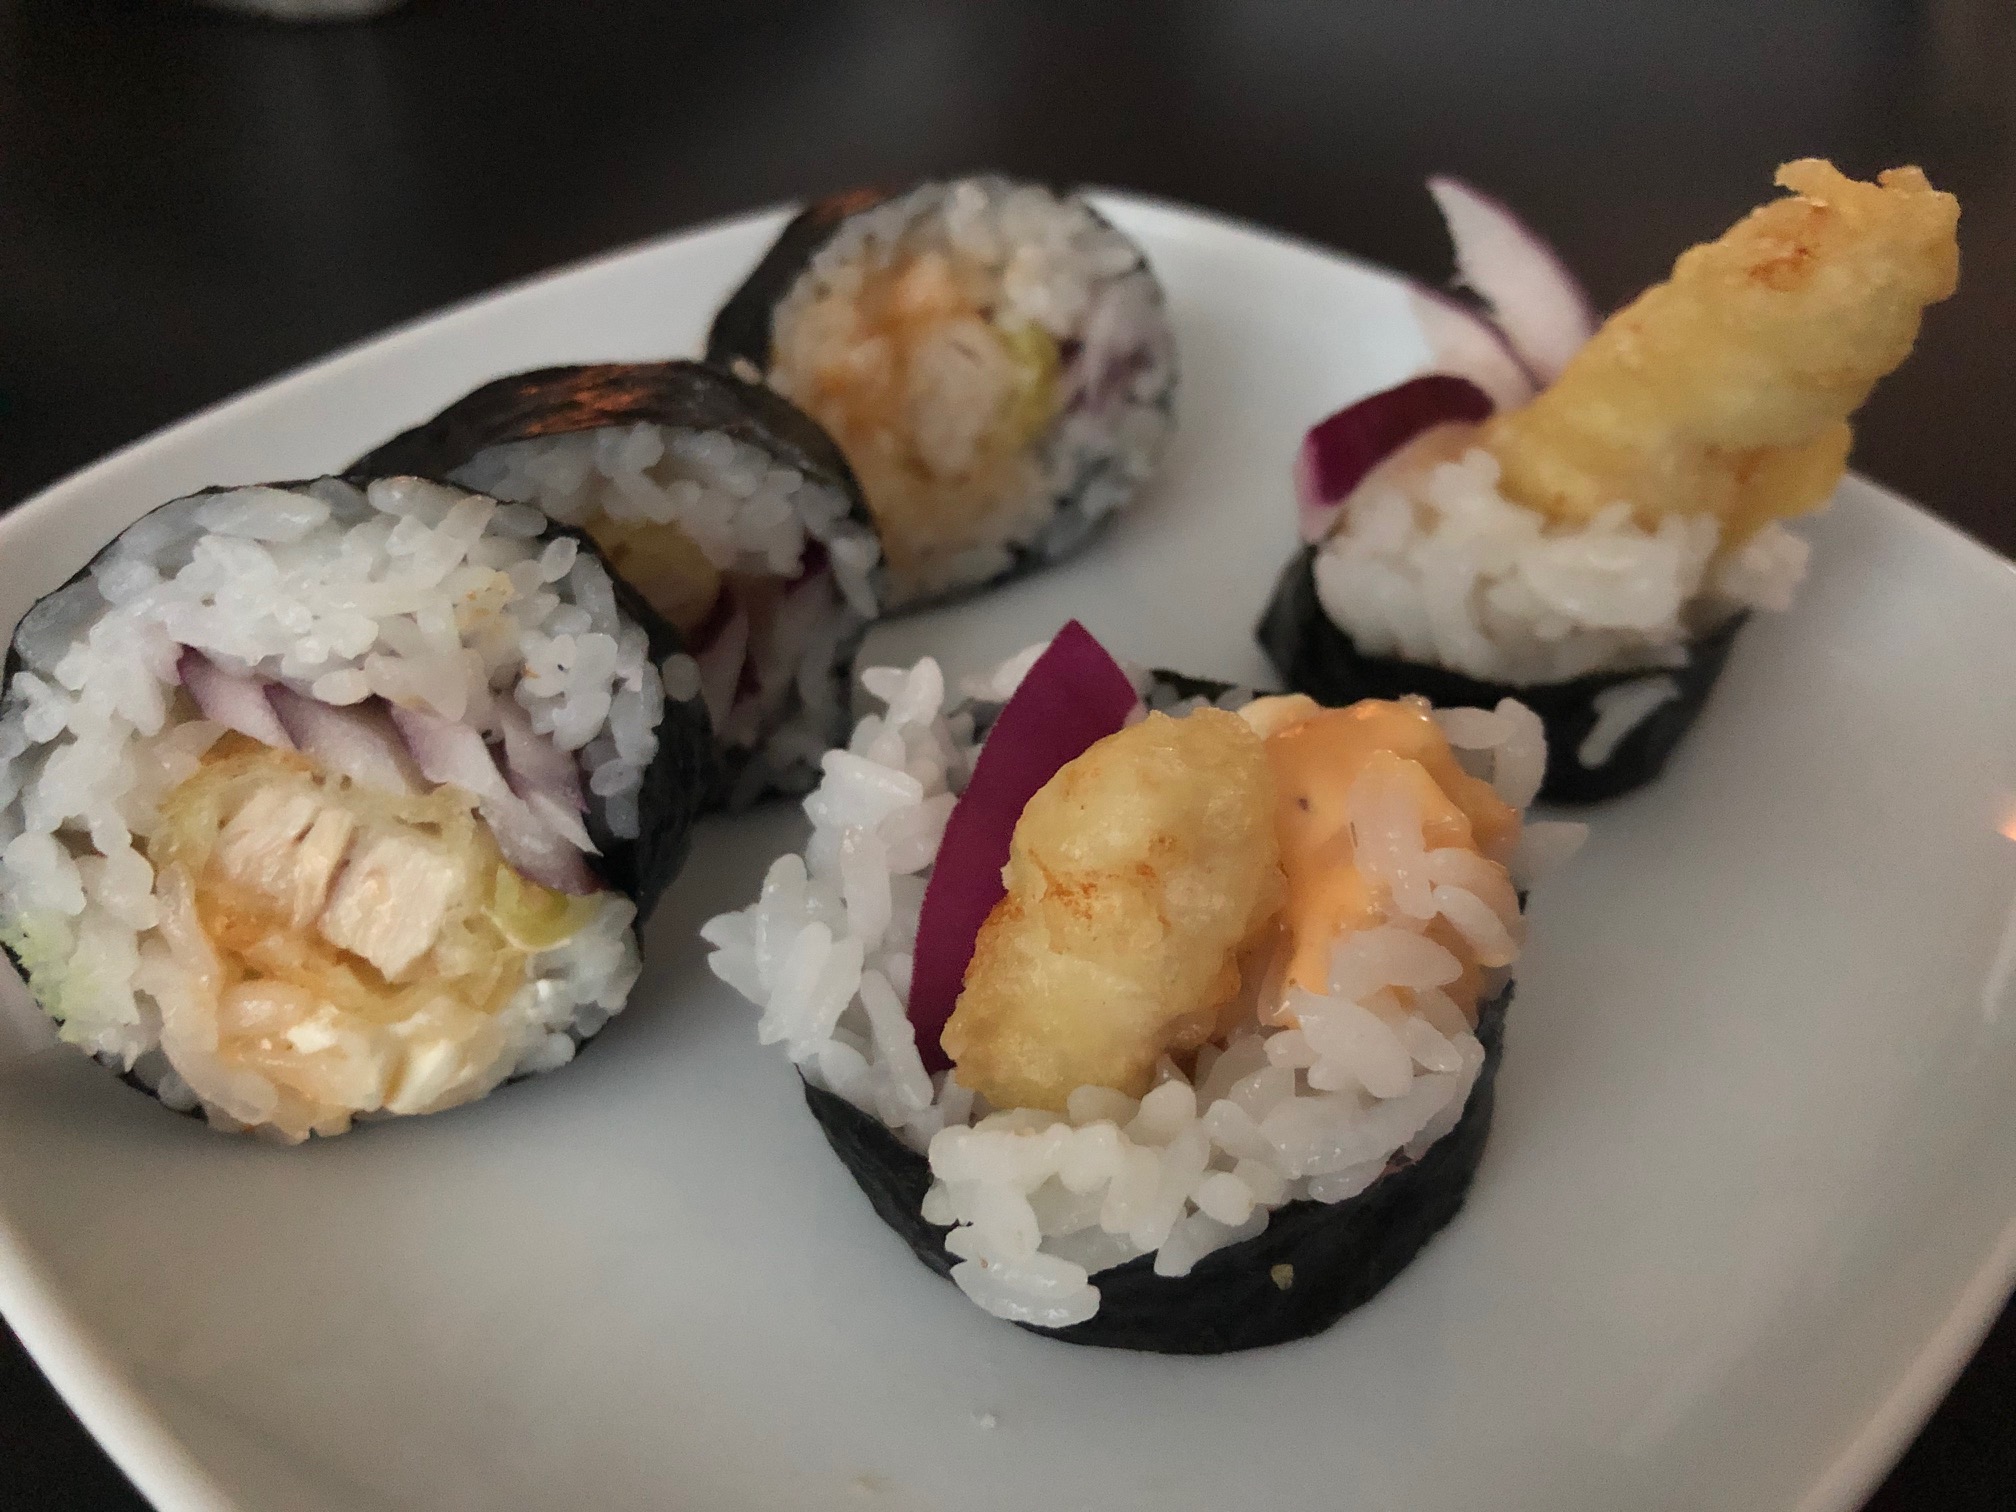 A photo of the chicken run roll from Sushi Kame: five sushi pieces with red onion, fried chicken, and rice. Photo by Alyssa Buckley.